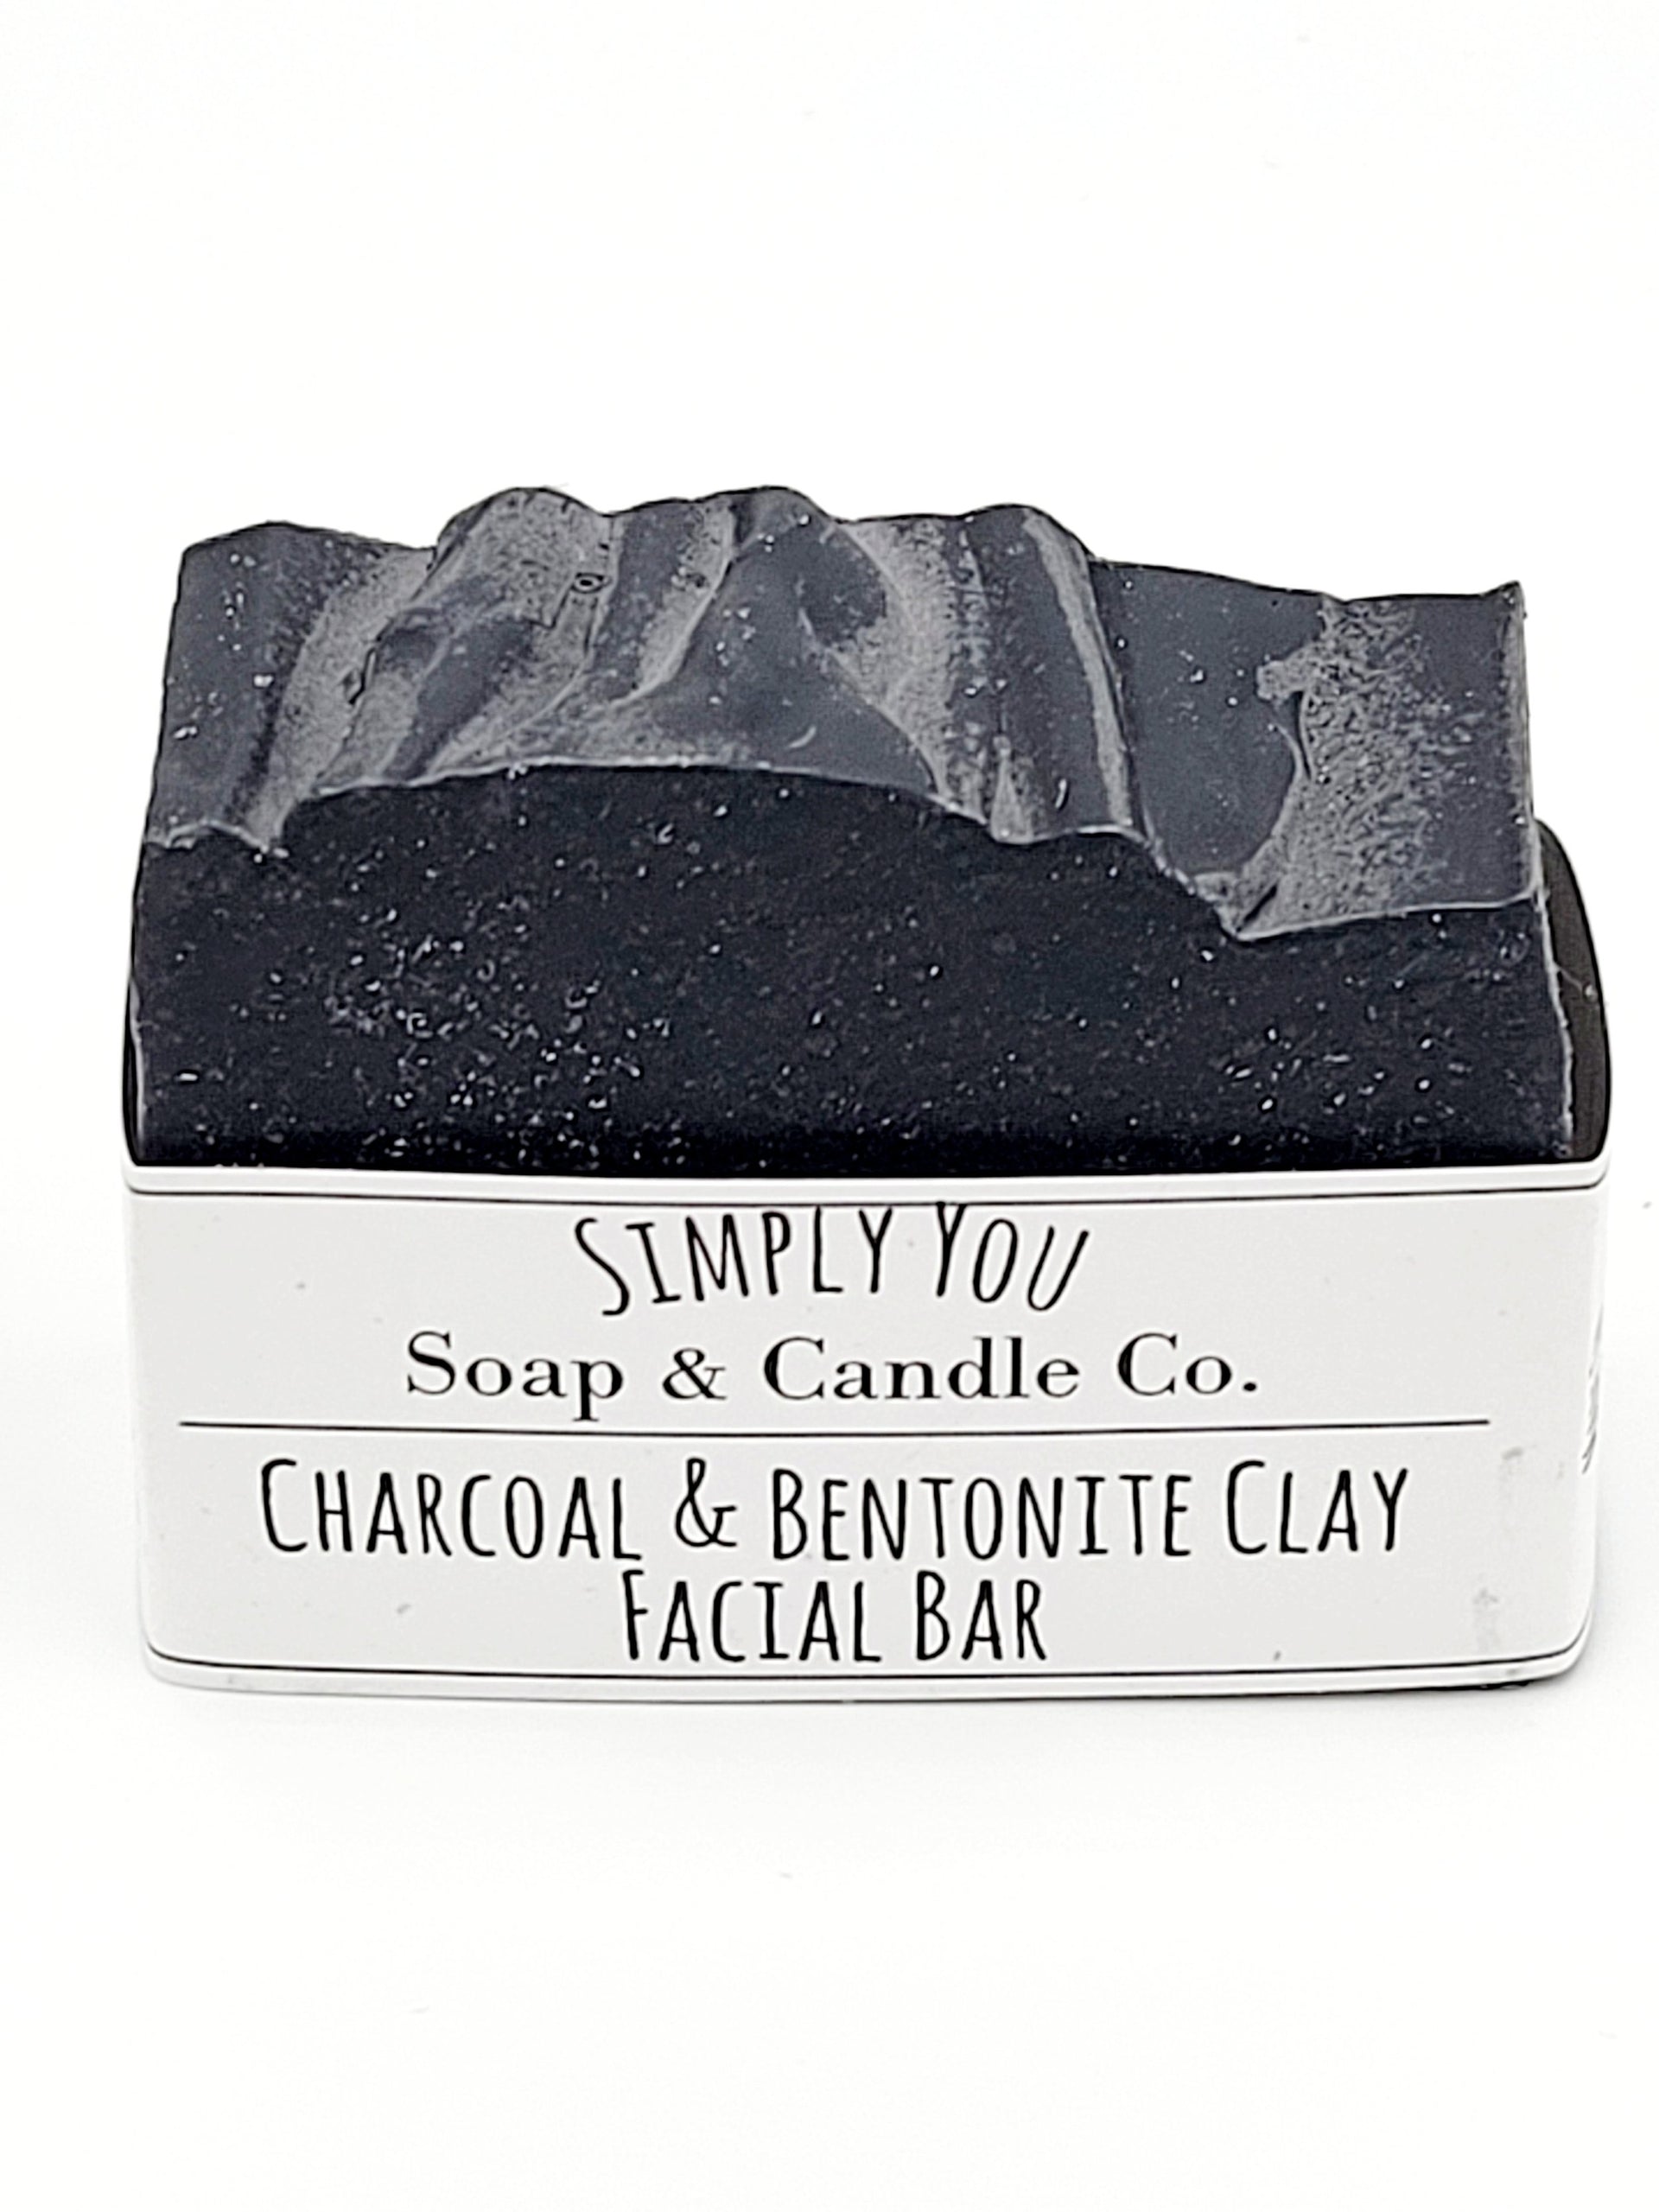 Charcoal & Bentonite Clay Facial Soap – Simply You Soap & Candle Co.